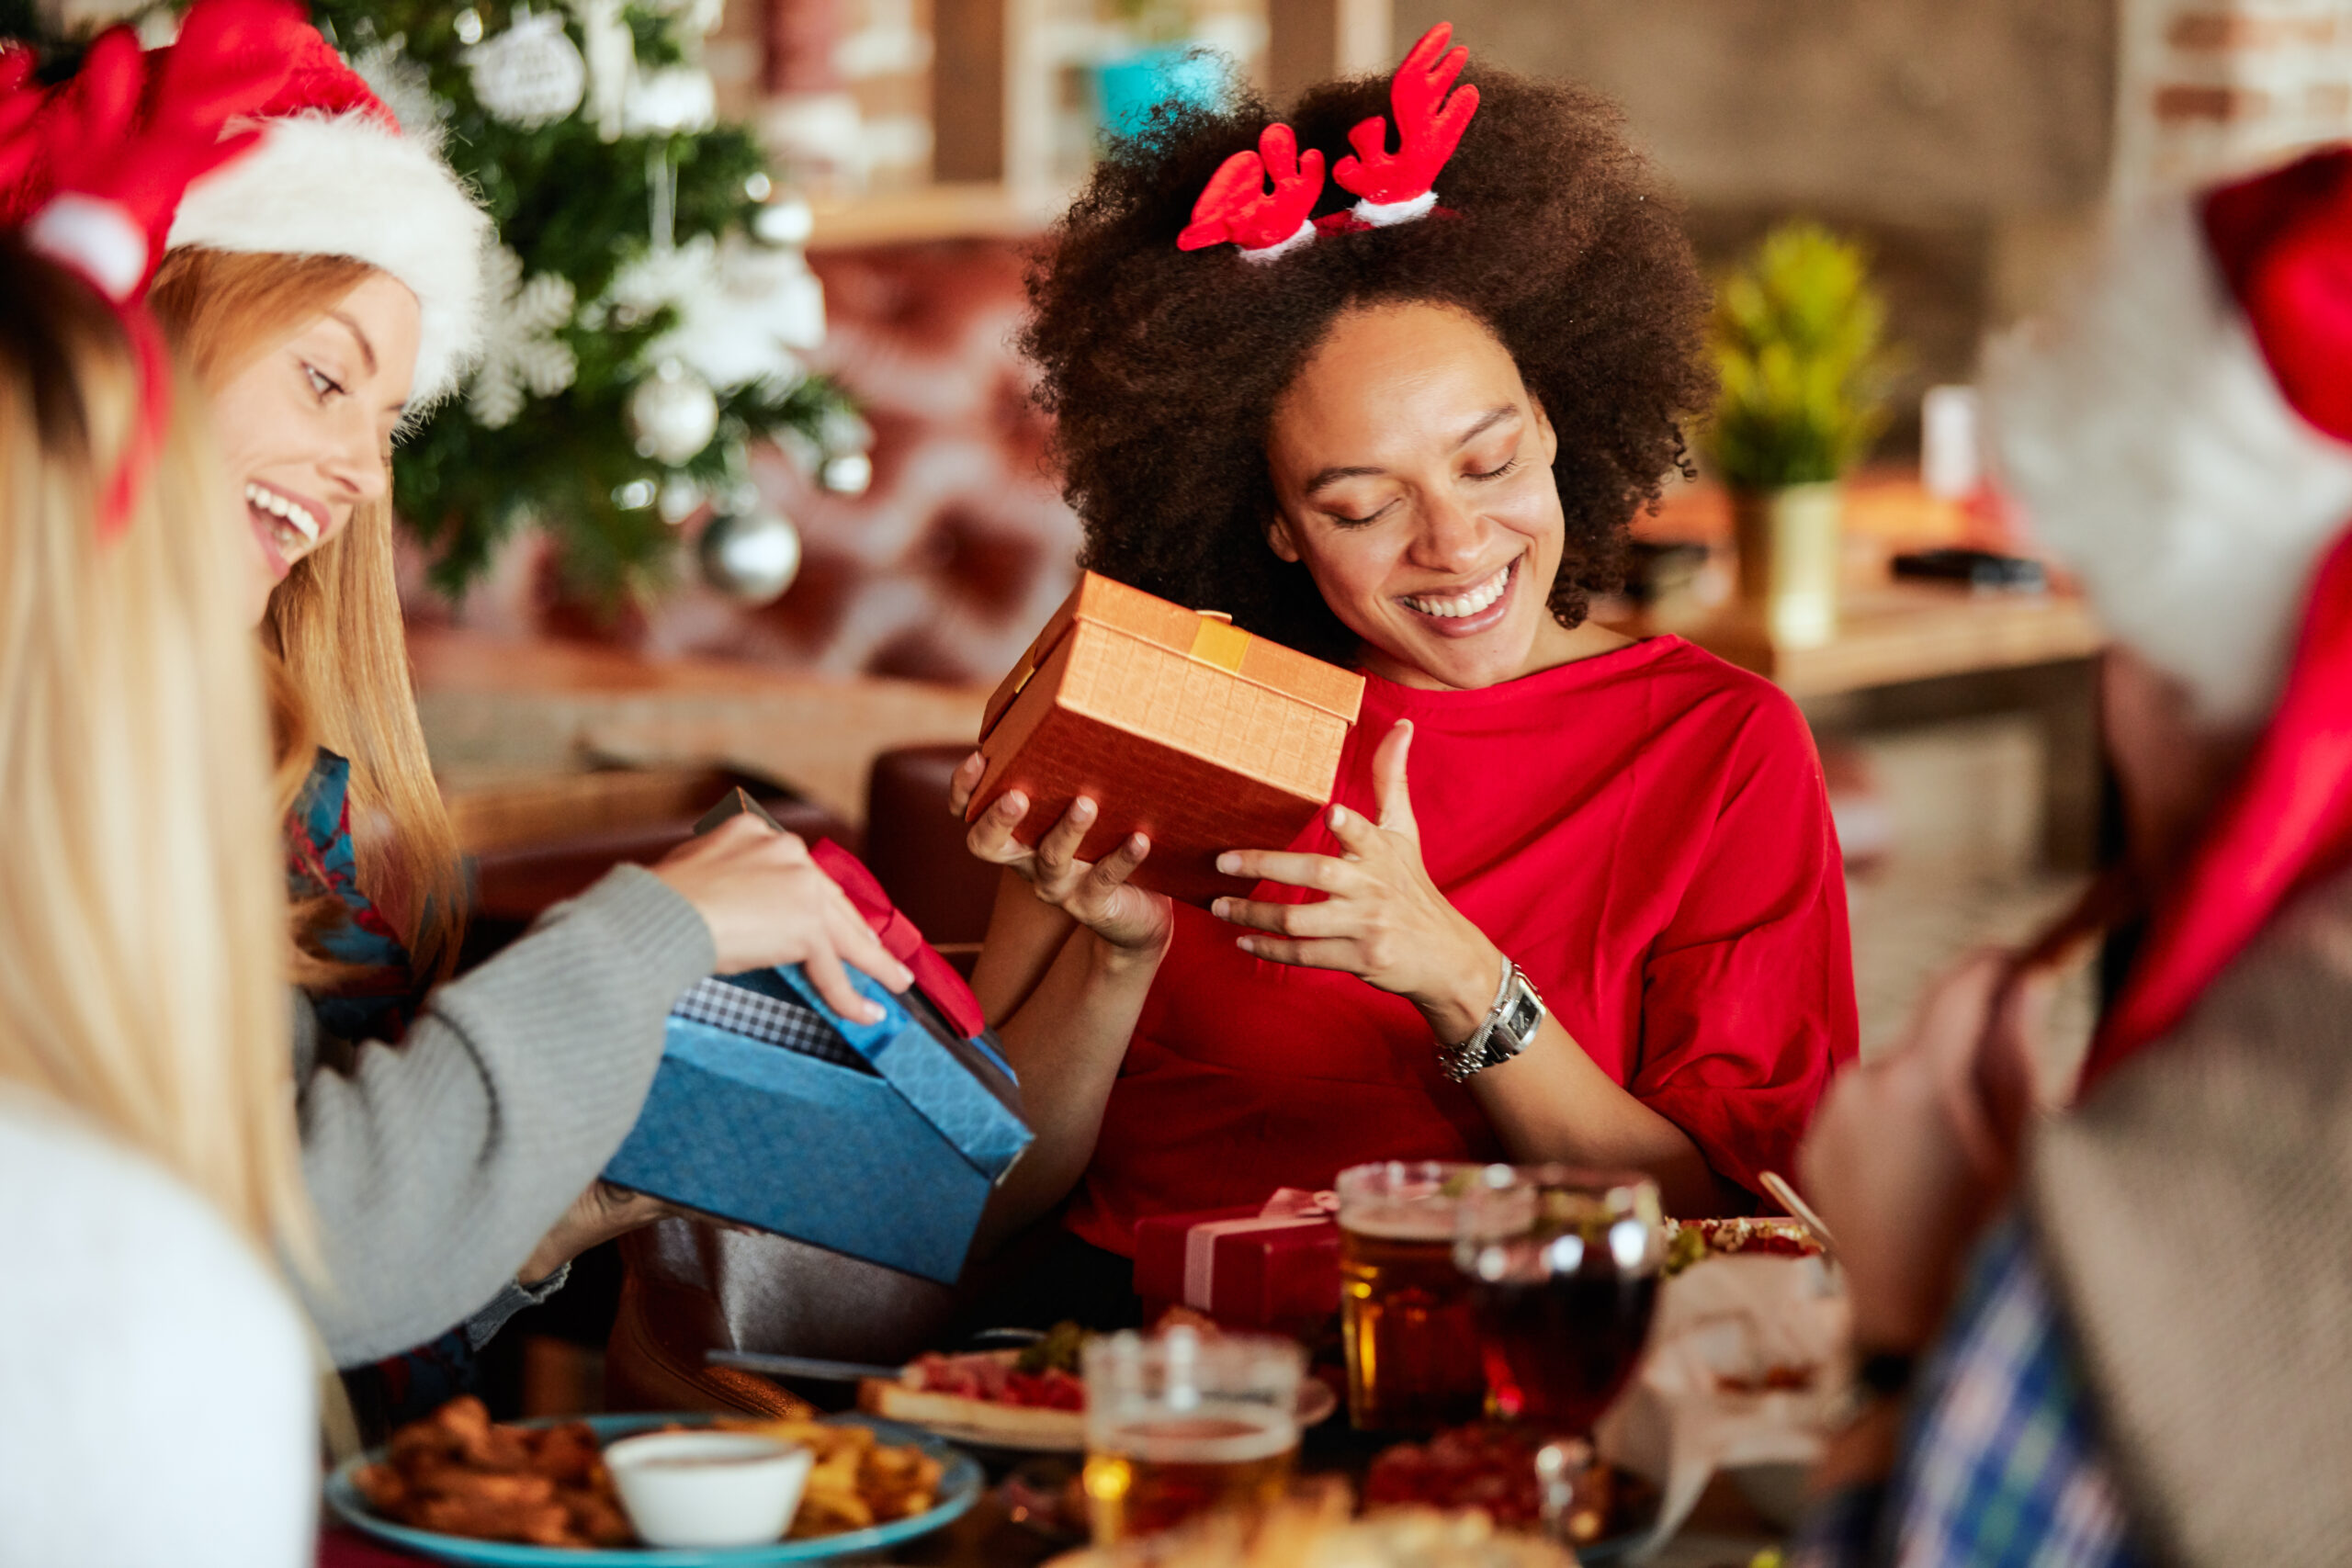 Women at a table exchanging and opening gifts while dresses in Christmas attire.